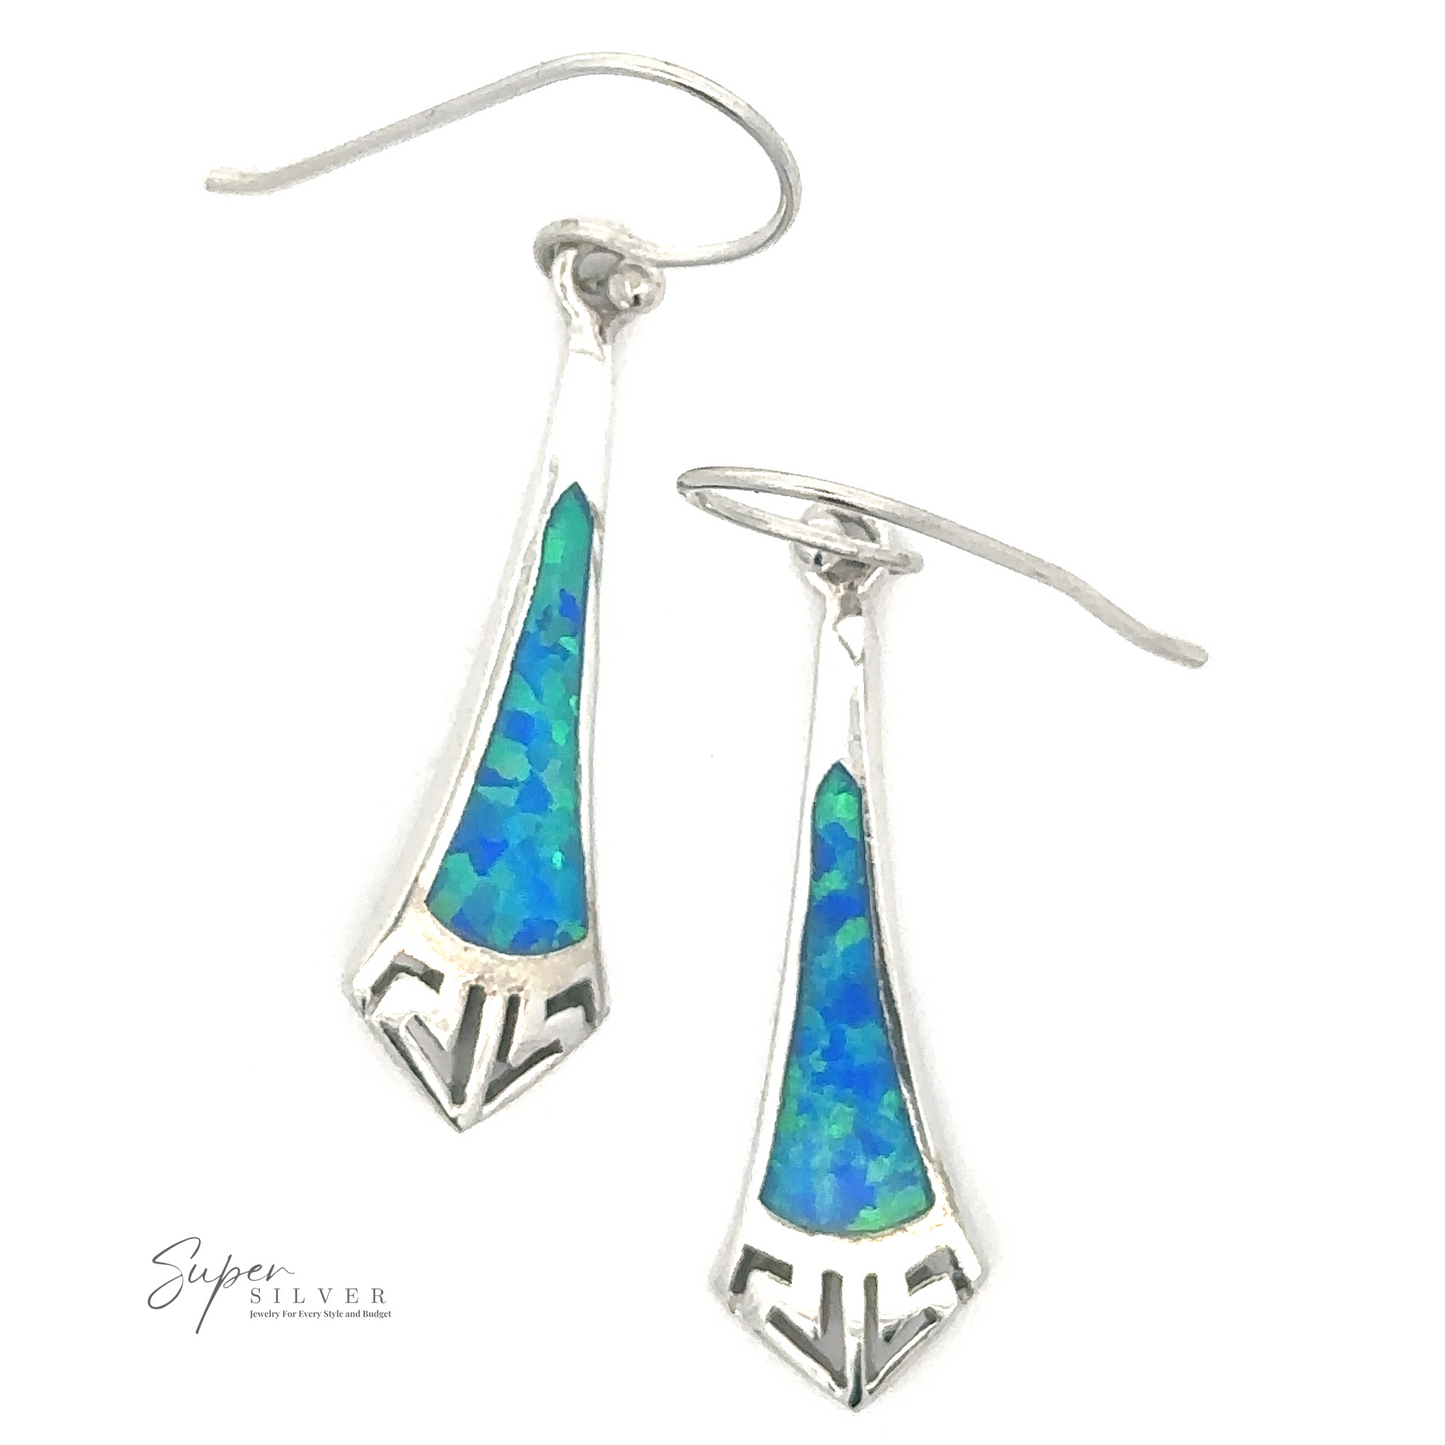 
                  
                    A pair of **Blue Created Opal Elongated Tie Shape Earrings** with blue and green gemstone inlays, featuring a geometric design at the bottom. The text "Super Silver" is visible in the lower left corner.
                  
                